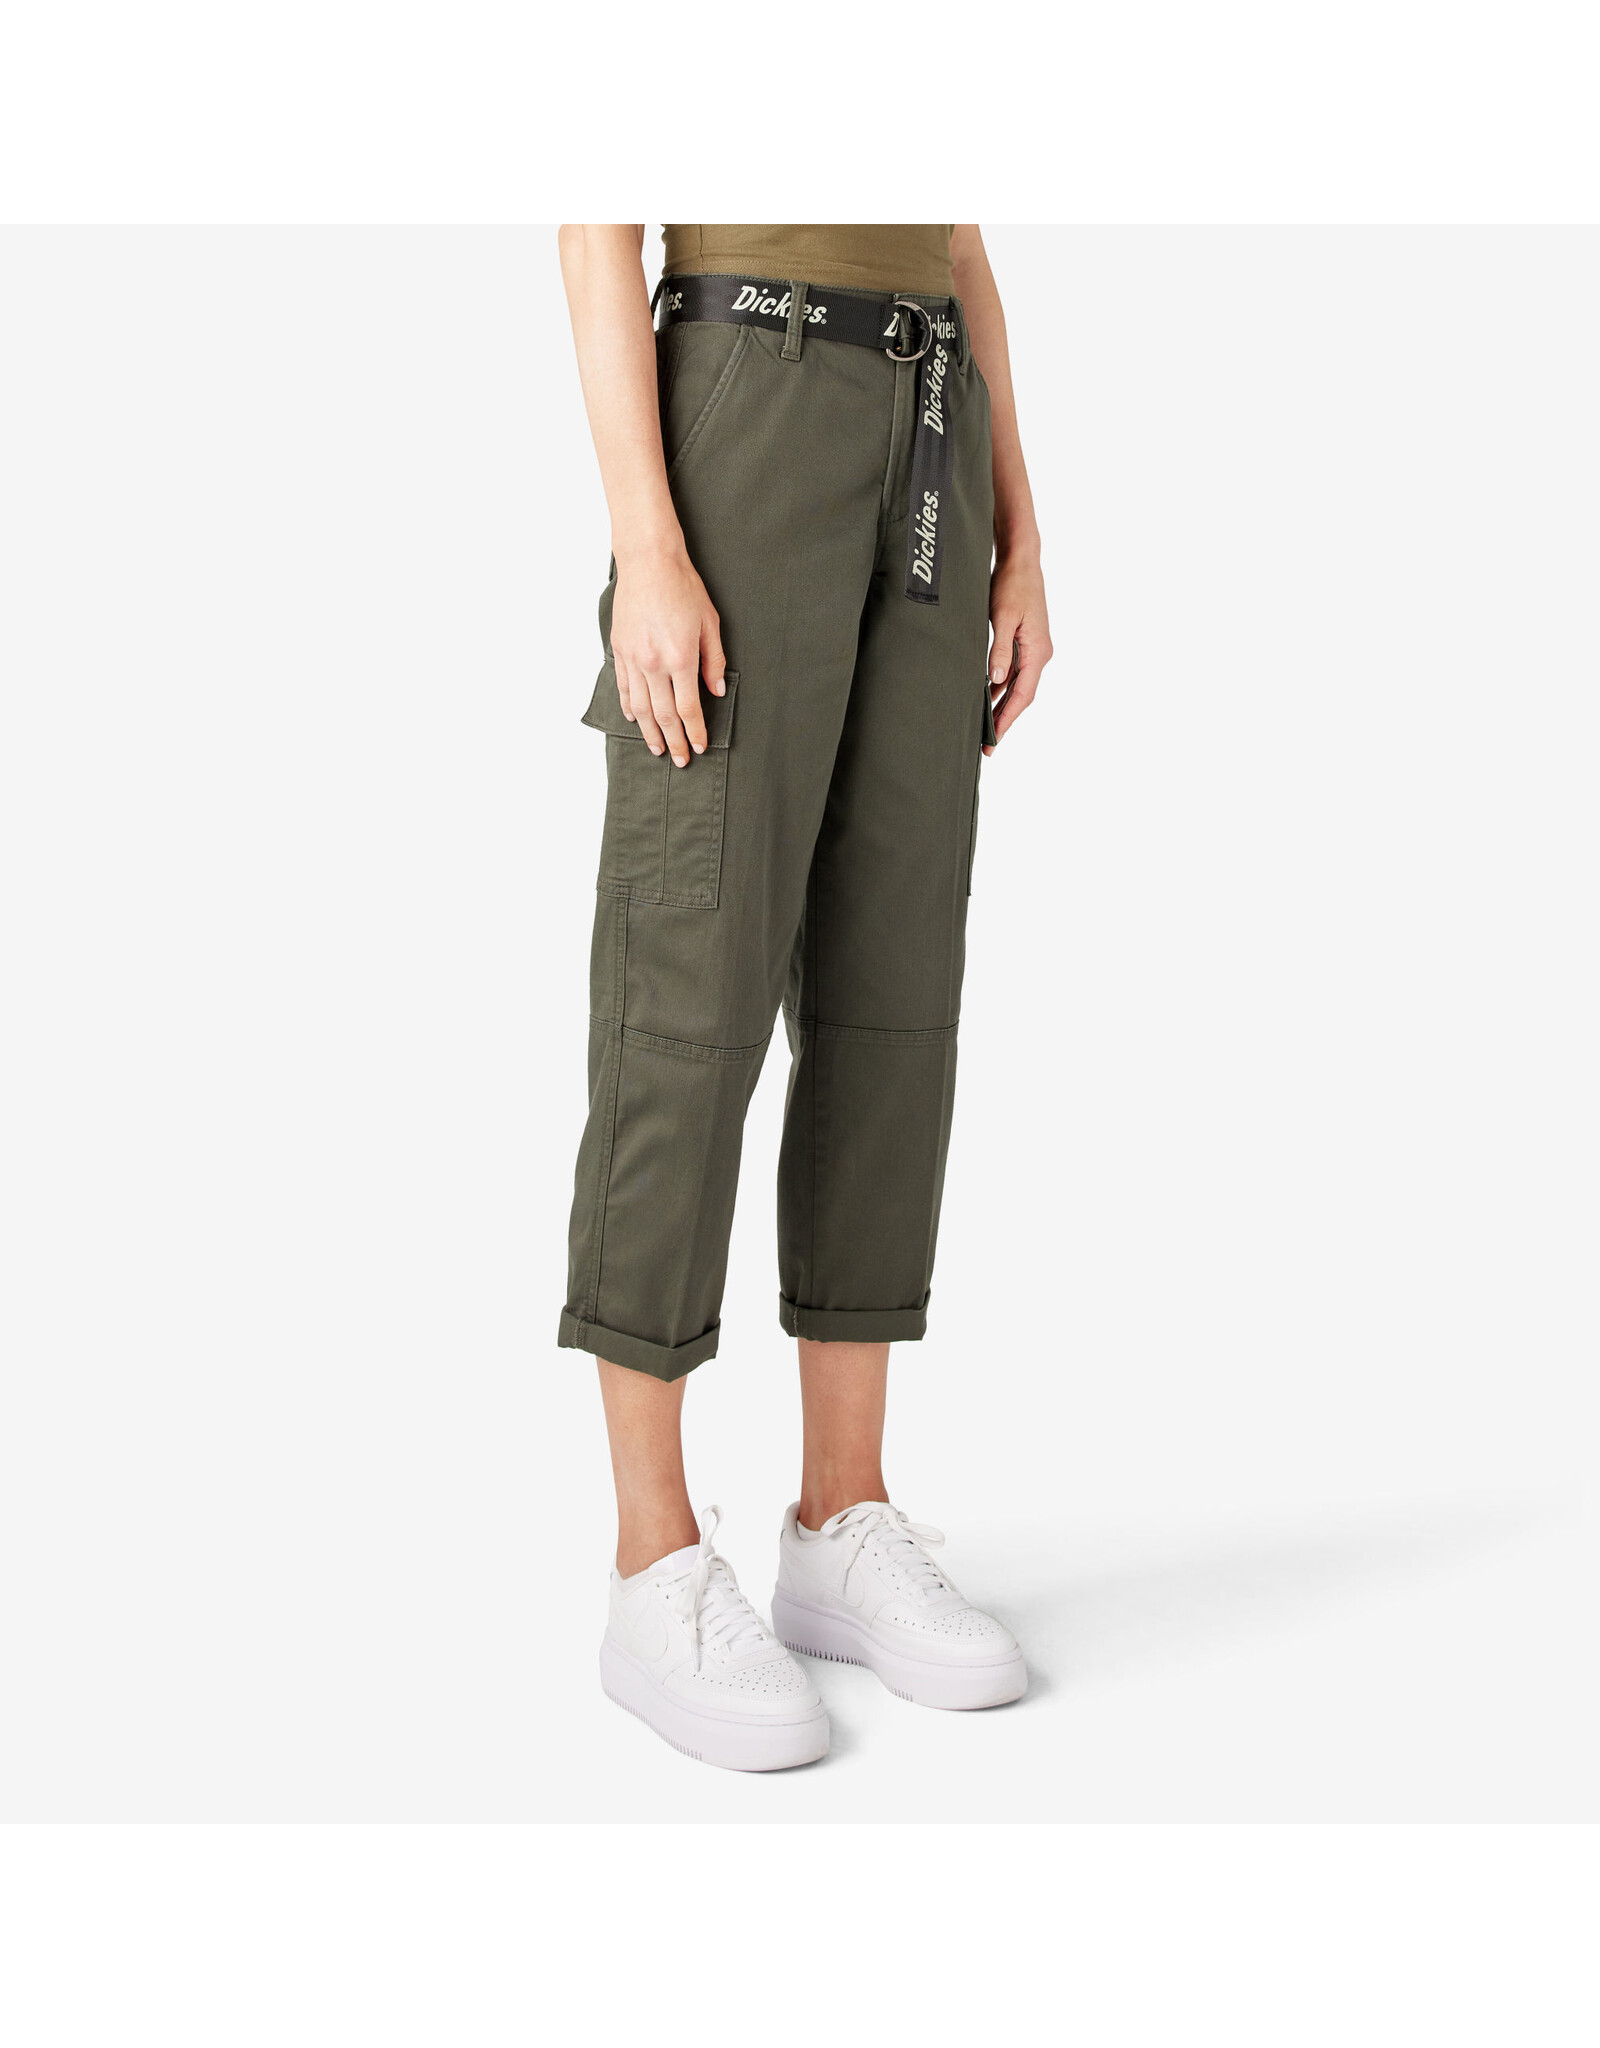 DICKIES Women's Relaxed Fit Cropped Cargo Pants Olive Green - FPR50OG ...